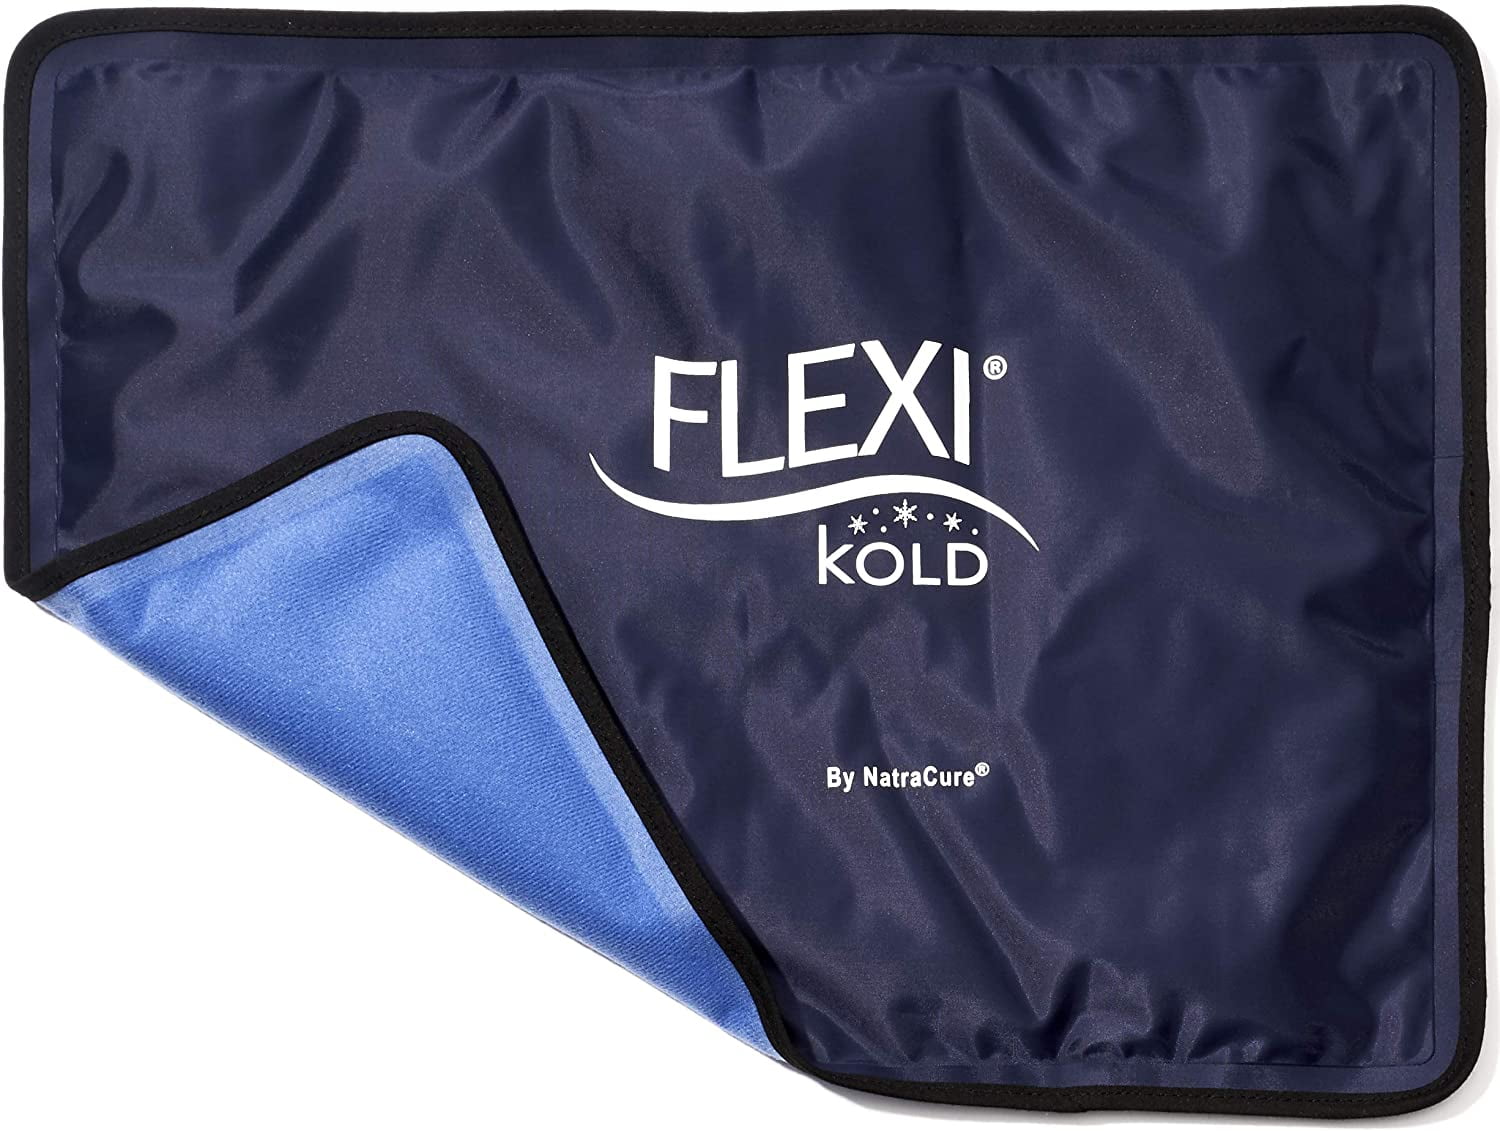 FlexiKold Gel Ice Pack w/Straps (Standard Large: 10.5 x 14.5) - One (1) Reusable  Cold Therapy (for Pain and Injuries, wrap Around Knee, Shoulder, Back,  Ankle, Neck, Hip, Wrist) - 6300 Cold-Strap 